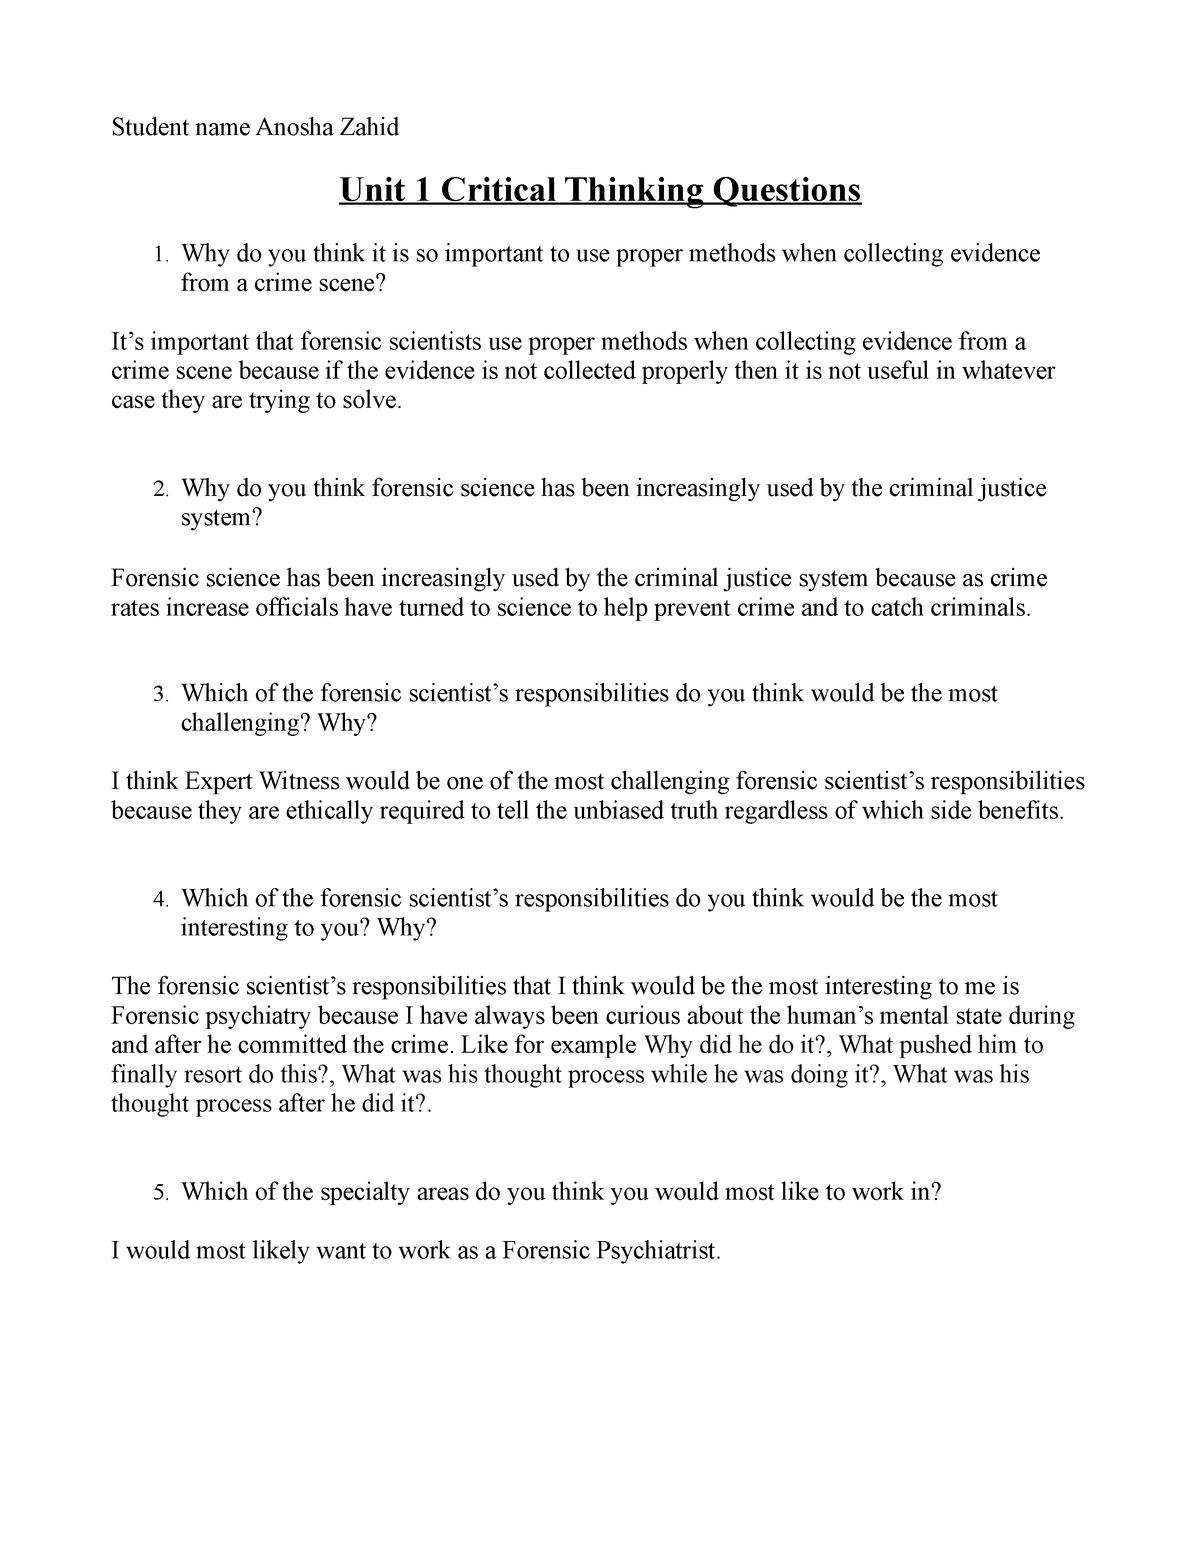 university of leeds critical thinking questions